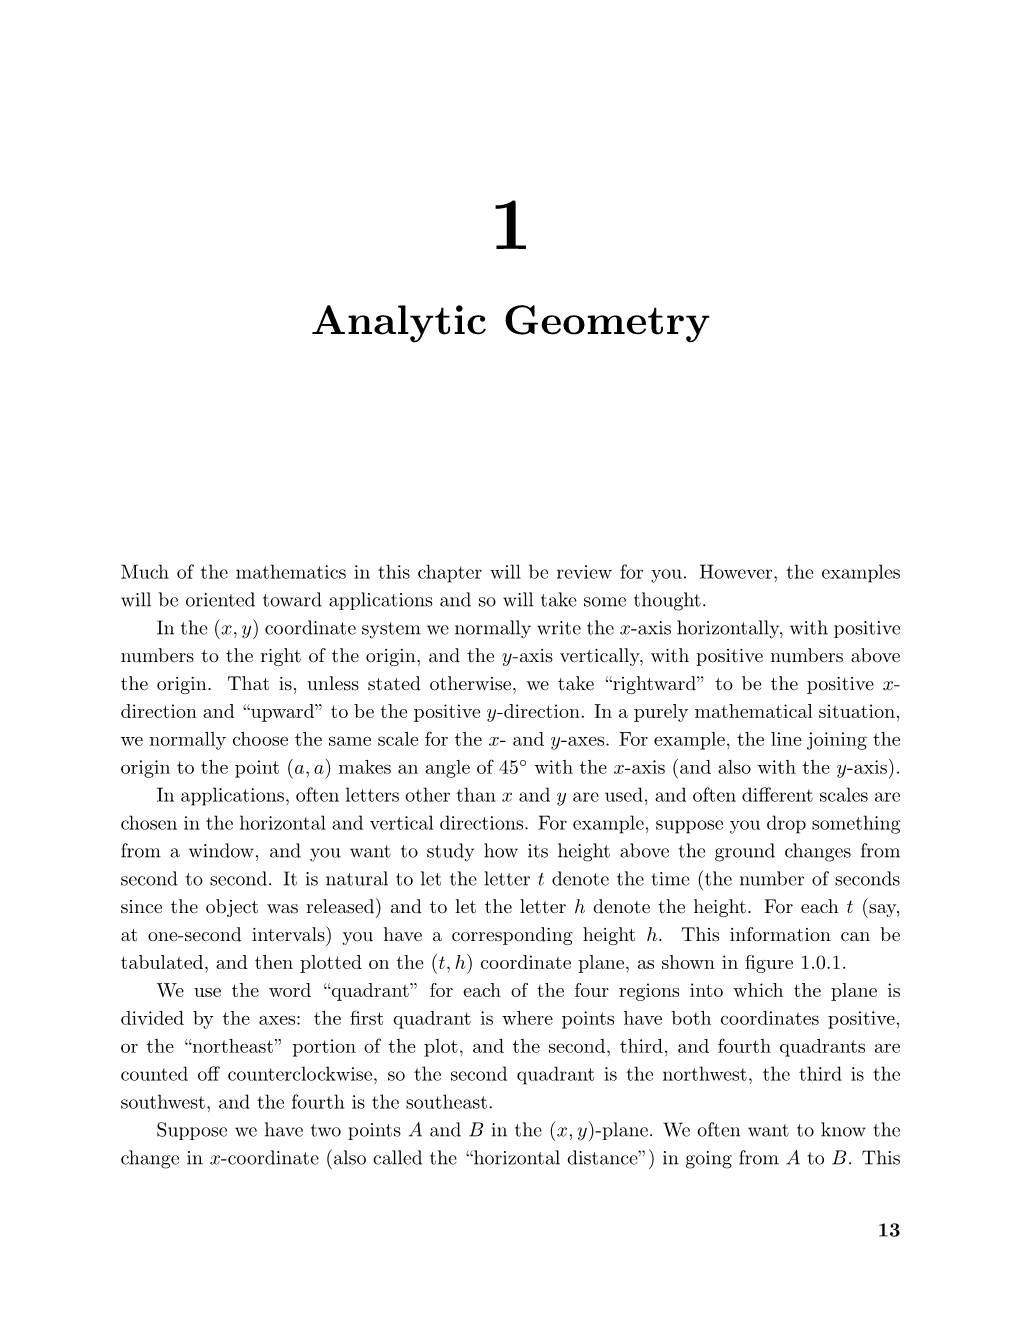 Chapter 1: Analytic Geometry